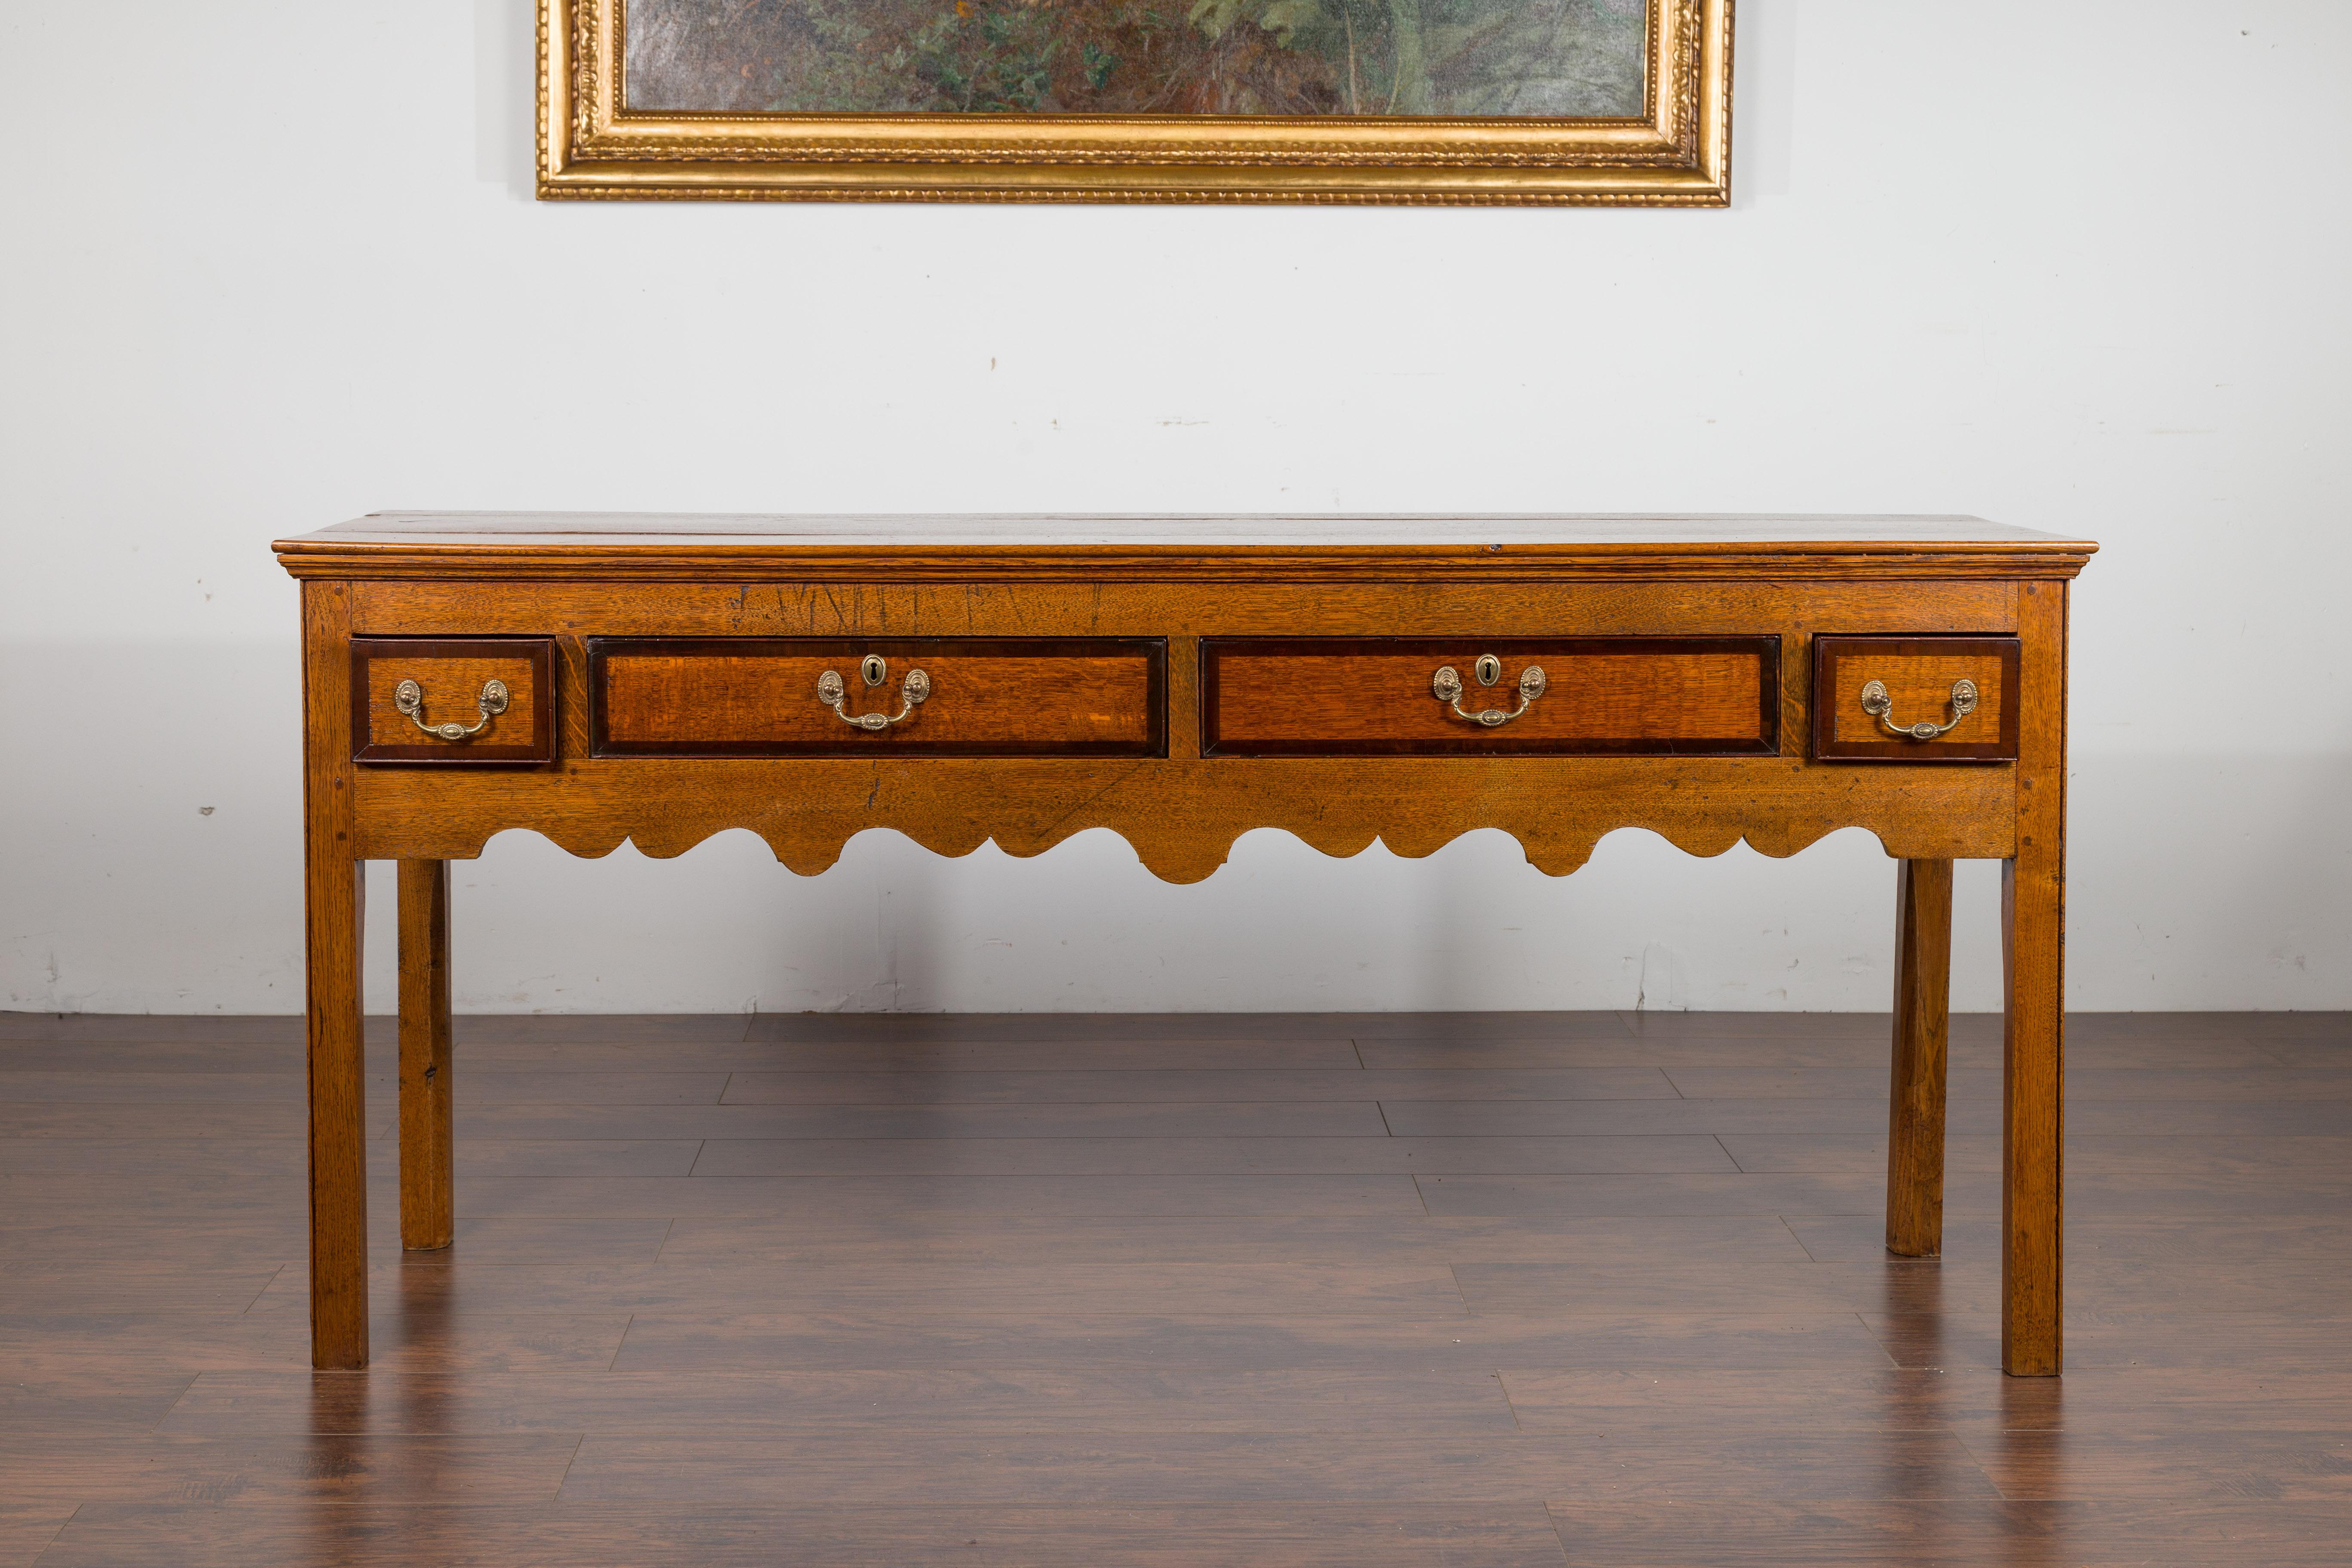 An English oak dresser base from the late 19th century, with four drawers and scalloped apron. Created in England during the third quarter of the 19th century, this oak dresser base features a rectangular planked top sitting above four two-toned